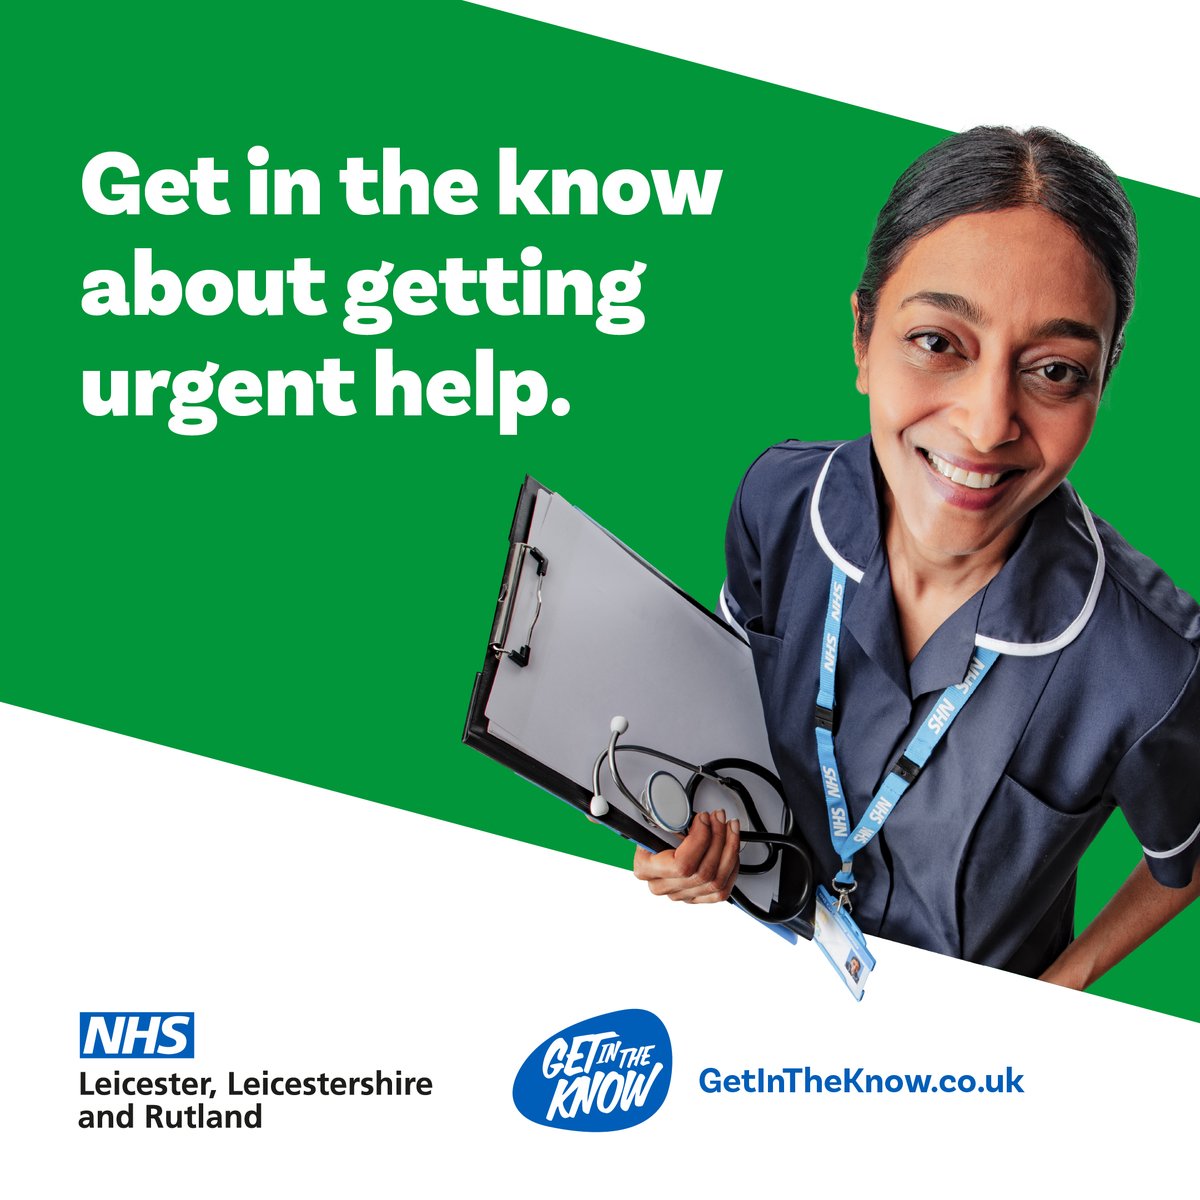 Need urgent healthcare? There are eight urgent care services in Leicester, Leicestershire and Rutland which you can use without an appointment, but you're advised to use NHS 111 first, to be directed to the right place for you.  #GetInTheKnow at bit.ly/LLRUrgentCare